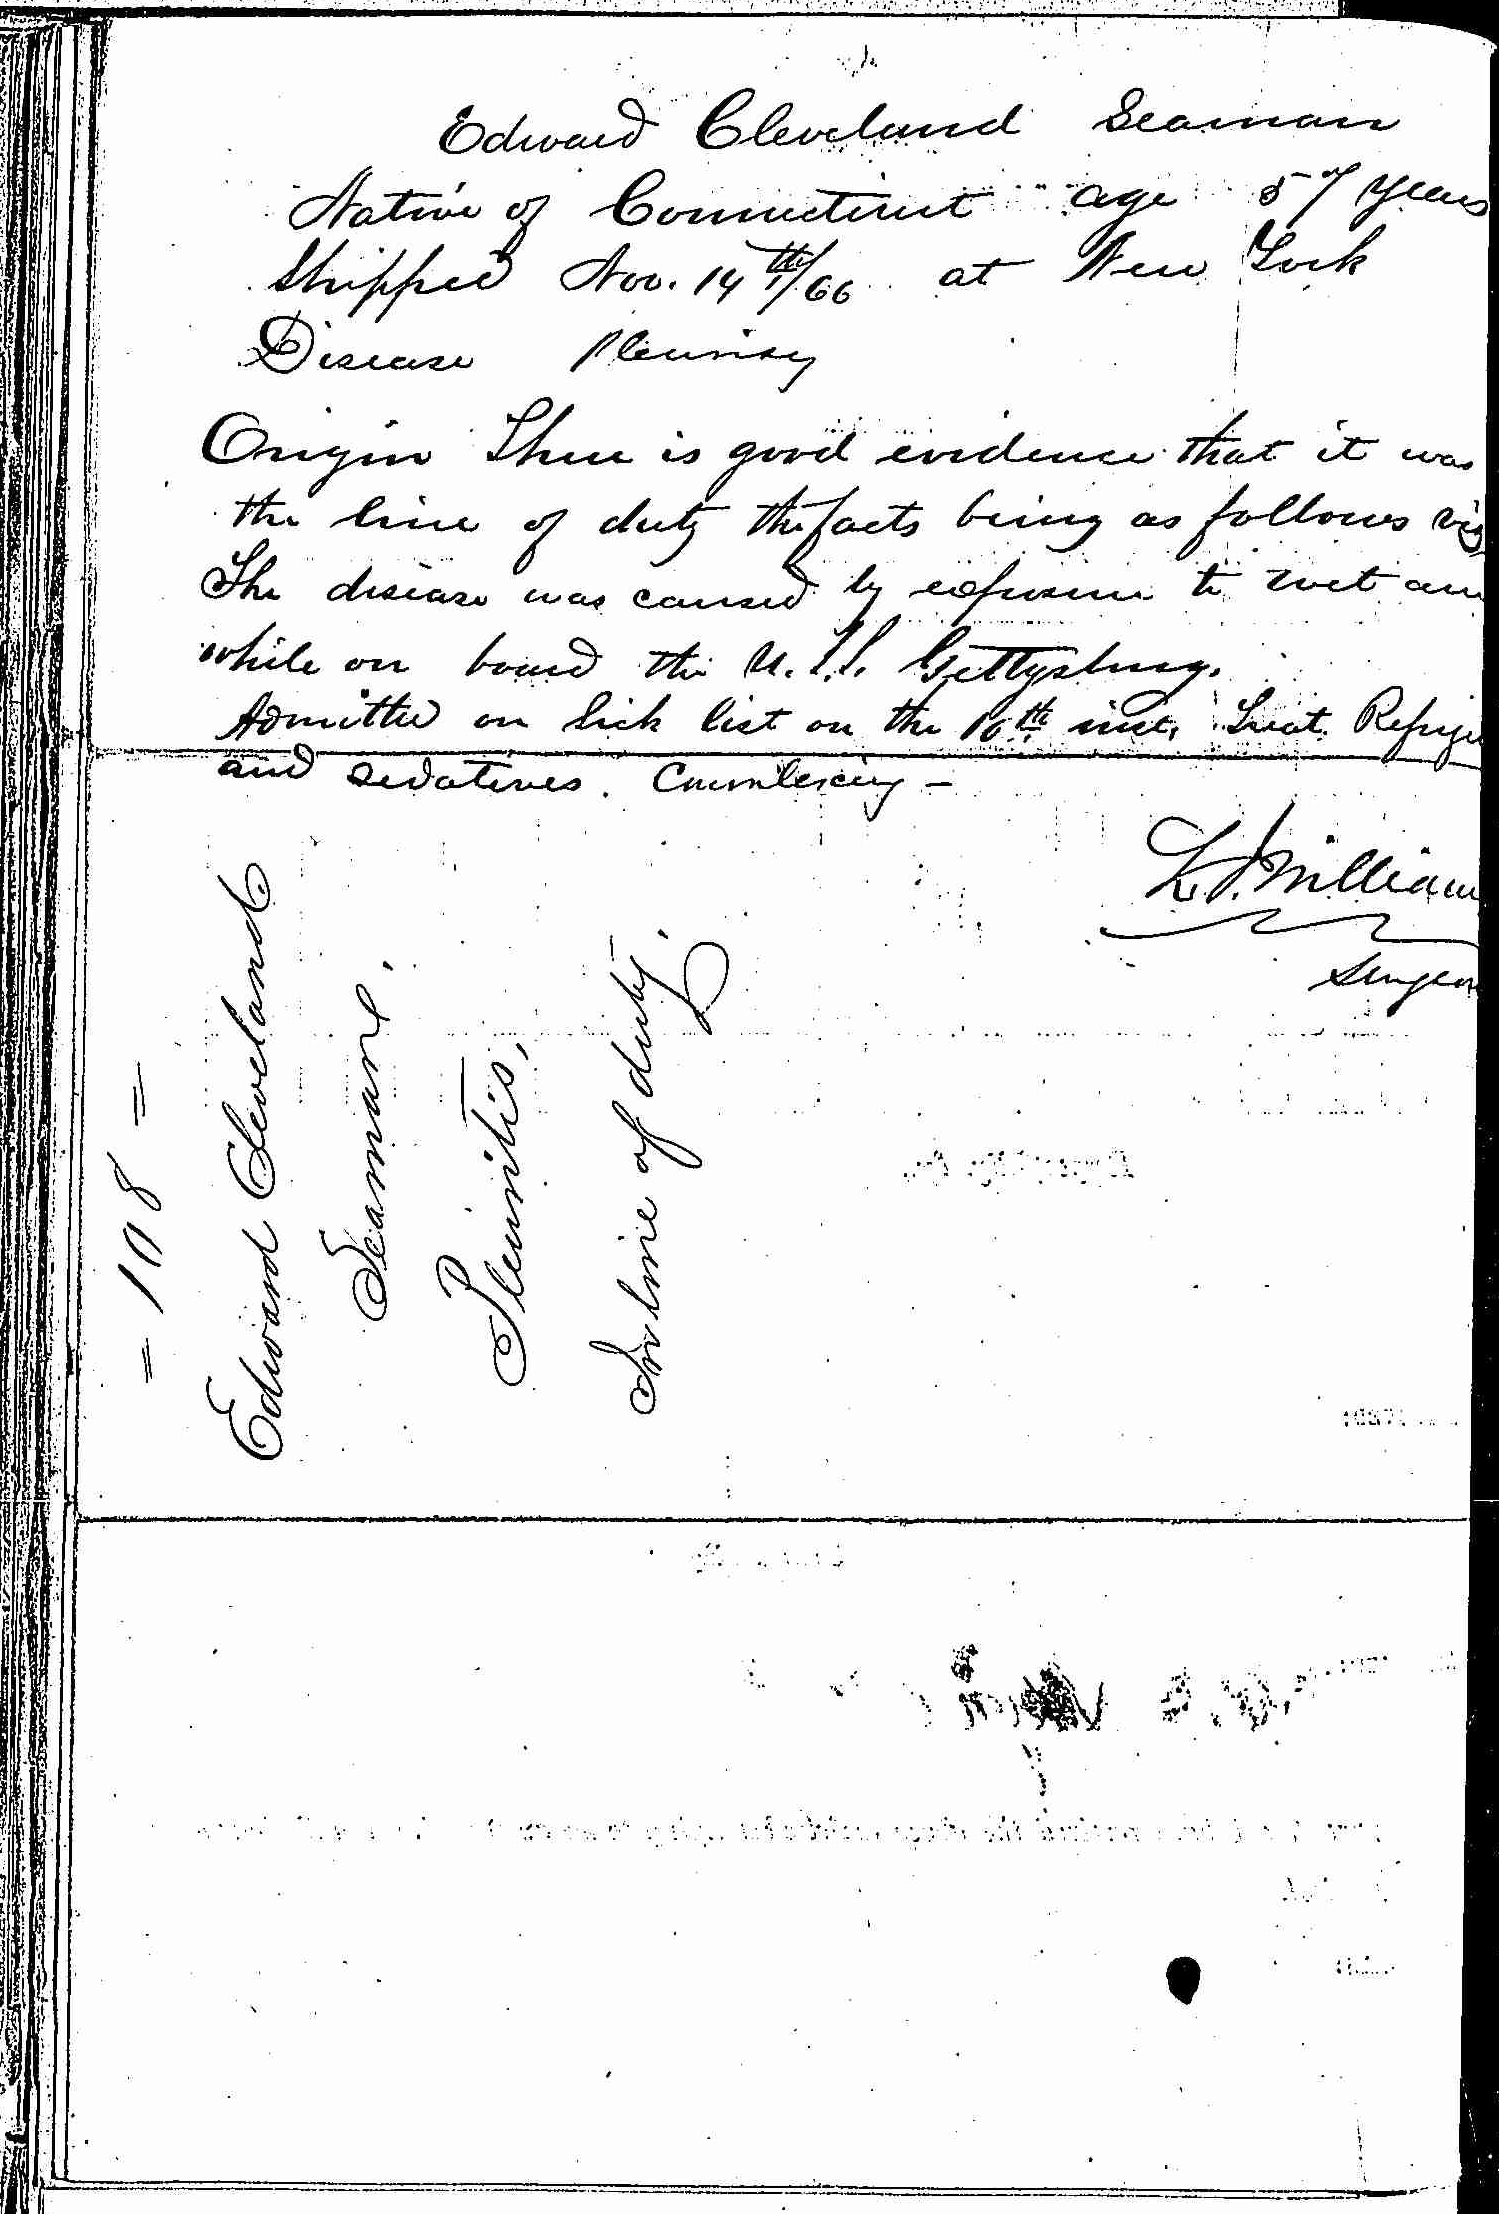 Entry for Edward Cleveland (page 2 of 2) in the log Hospital Tickets and Case Papers - Naval Hospital - Washington, D.C. - 1866-68